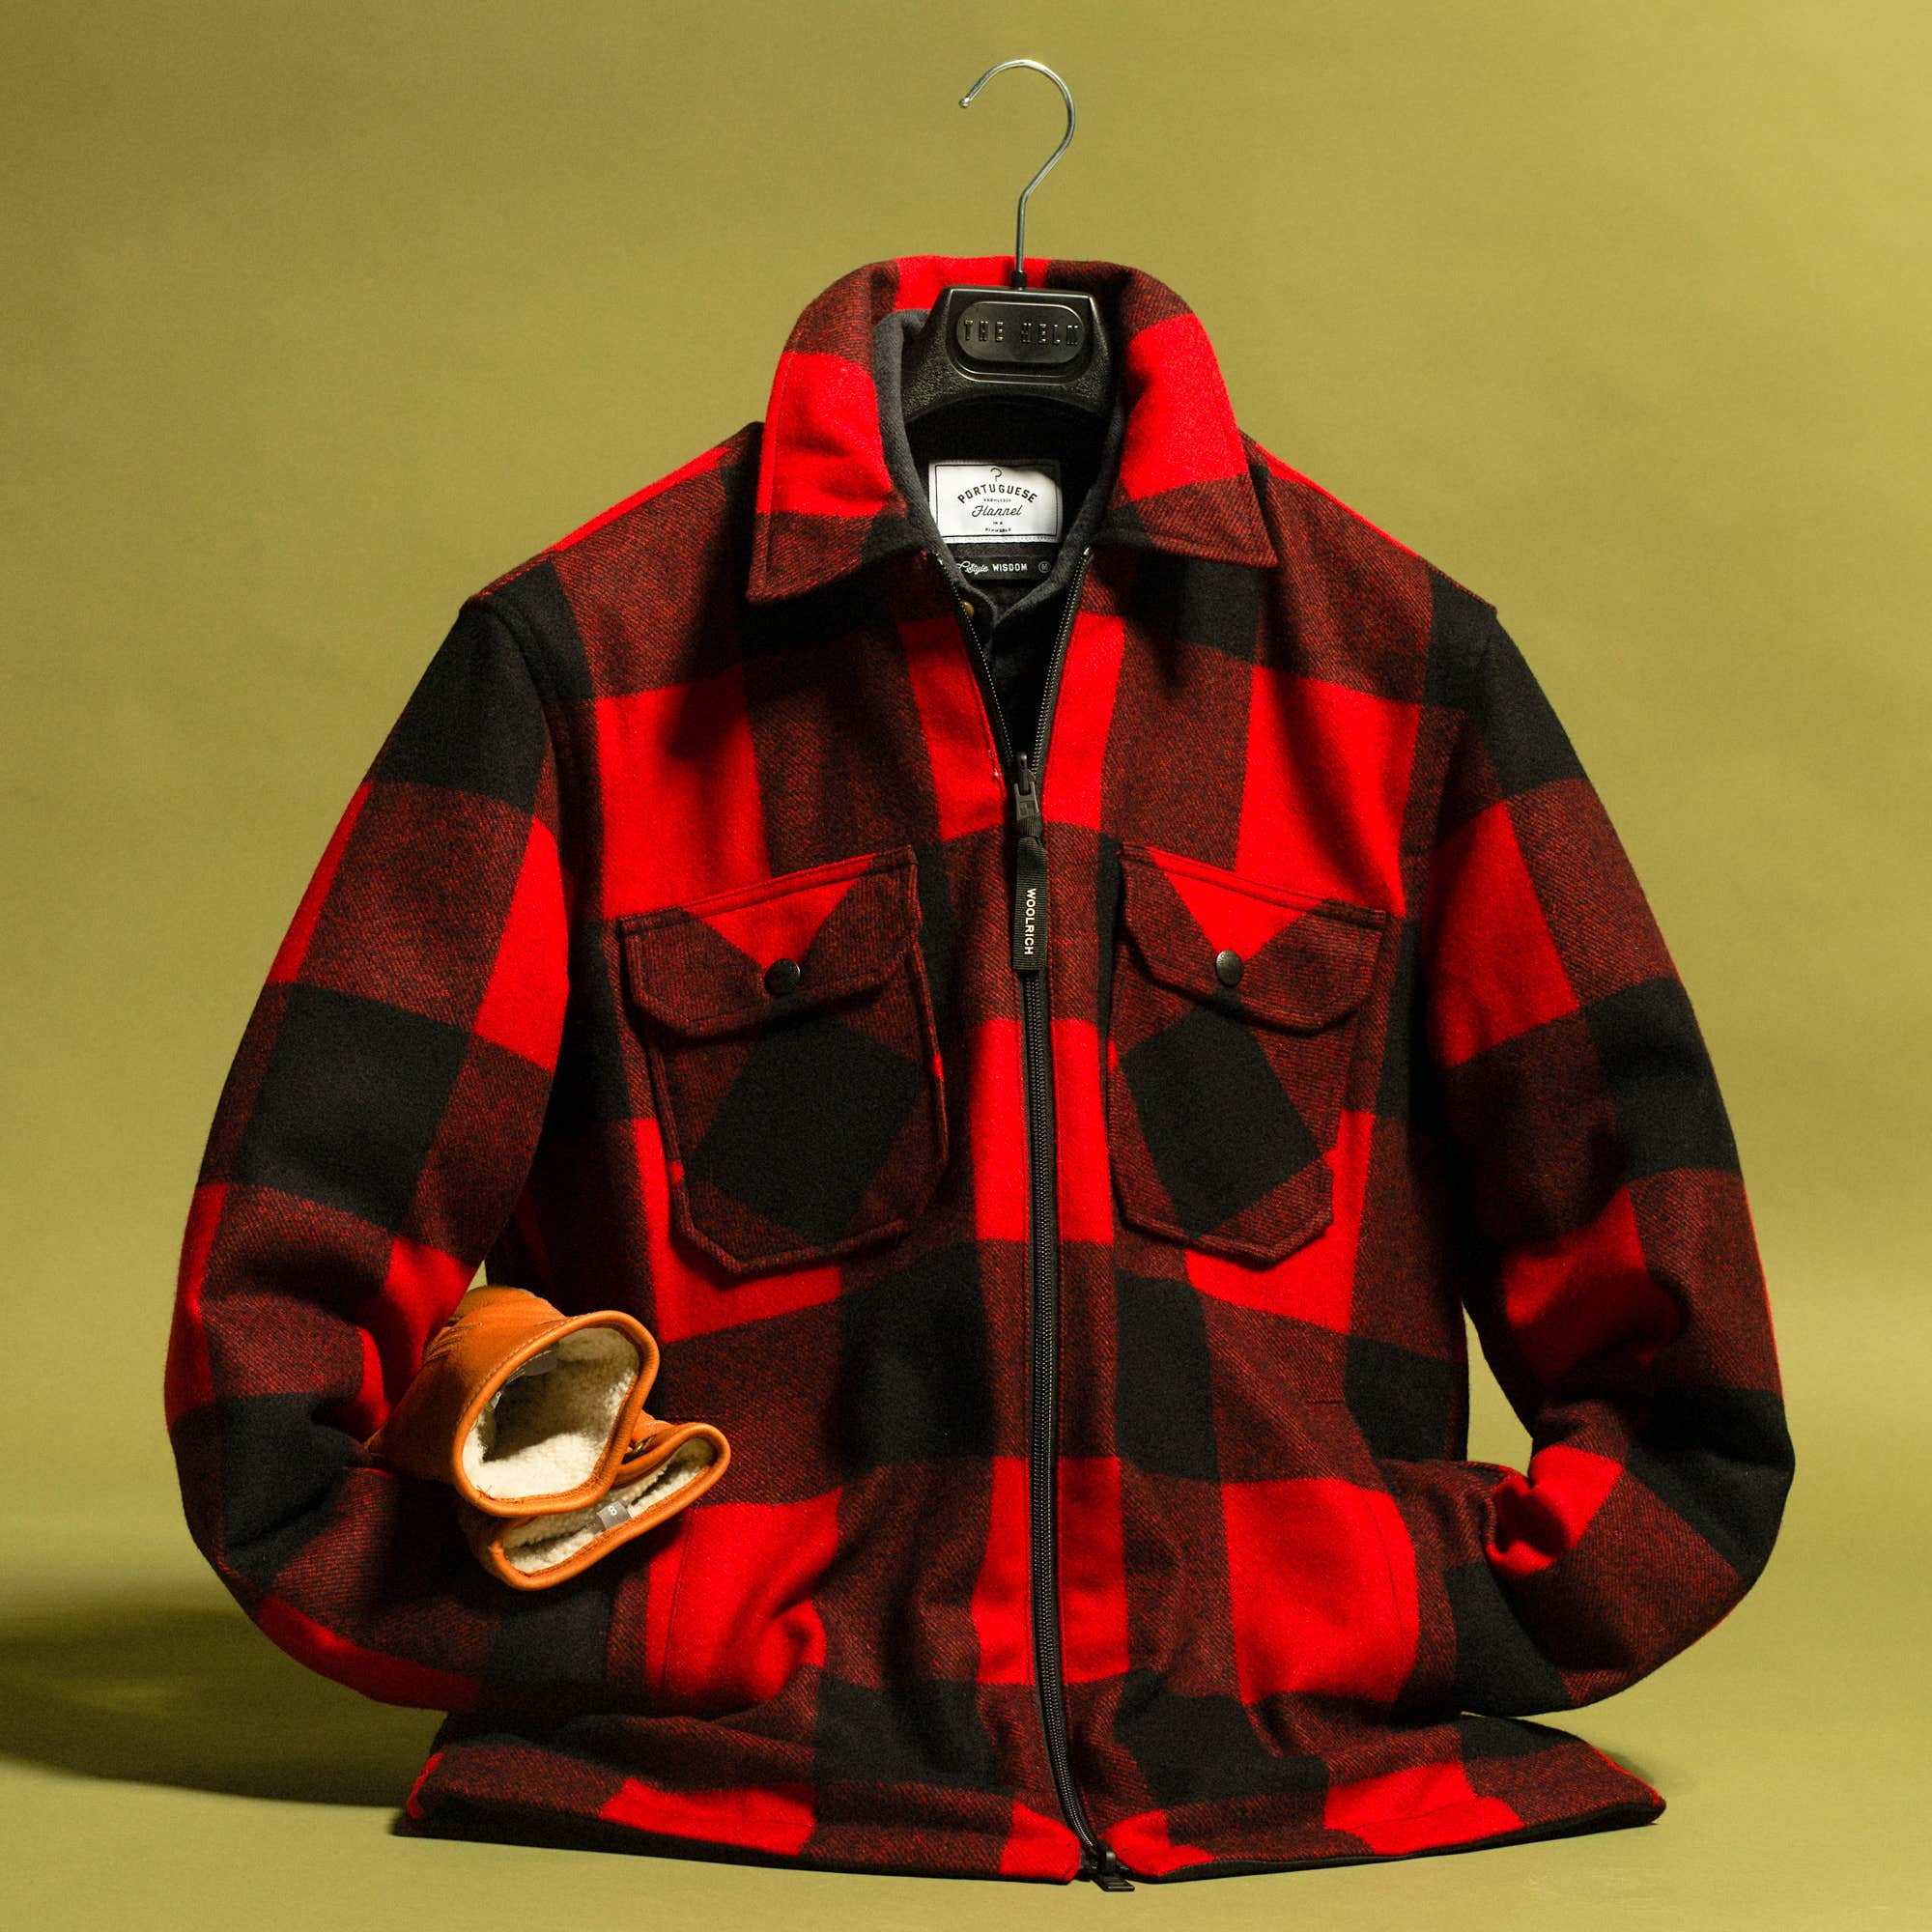 3 Brands, 3 Easy Looks: Woolrich, Hestra, and Portuguese Flannel